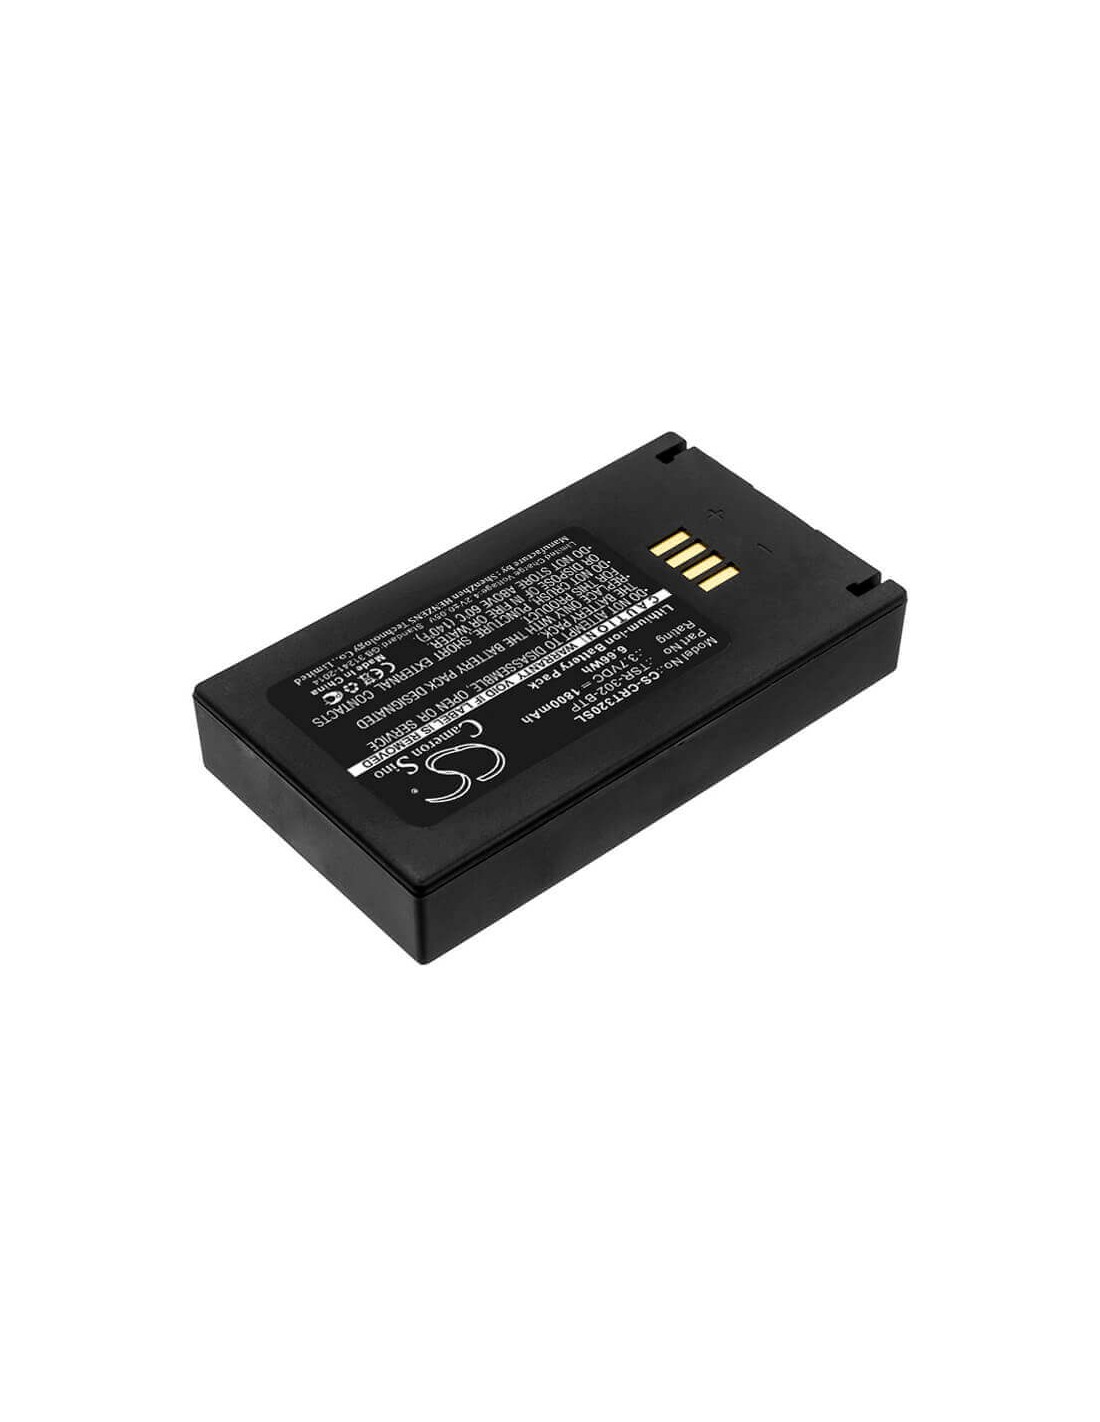 Battery for Crestron, Tsr-302, Tsr-302 Handheld Touch Screen Remote, 3.7V, 1800mAh - 6.66Wh